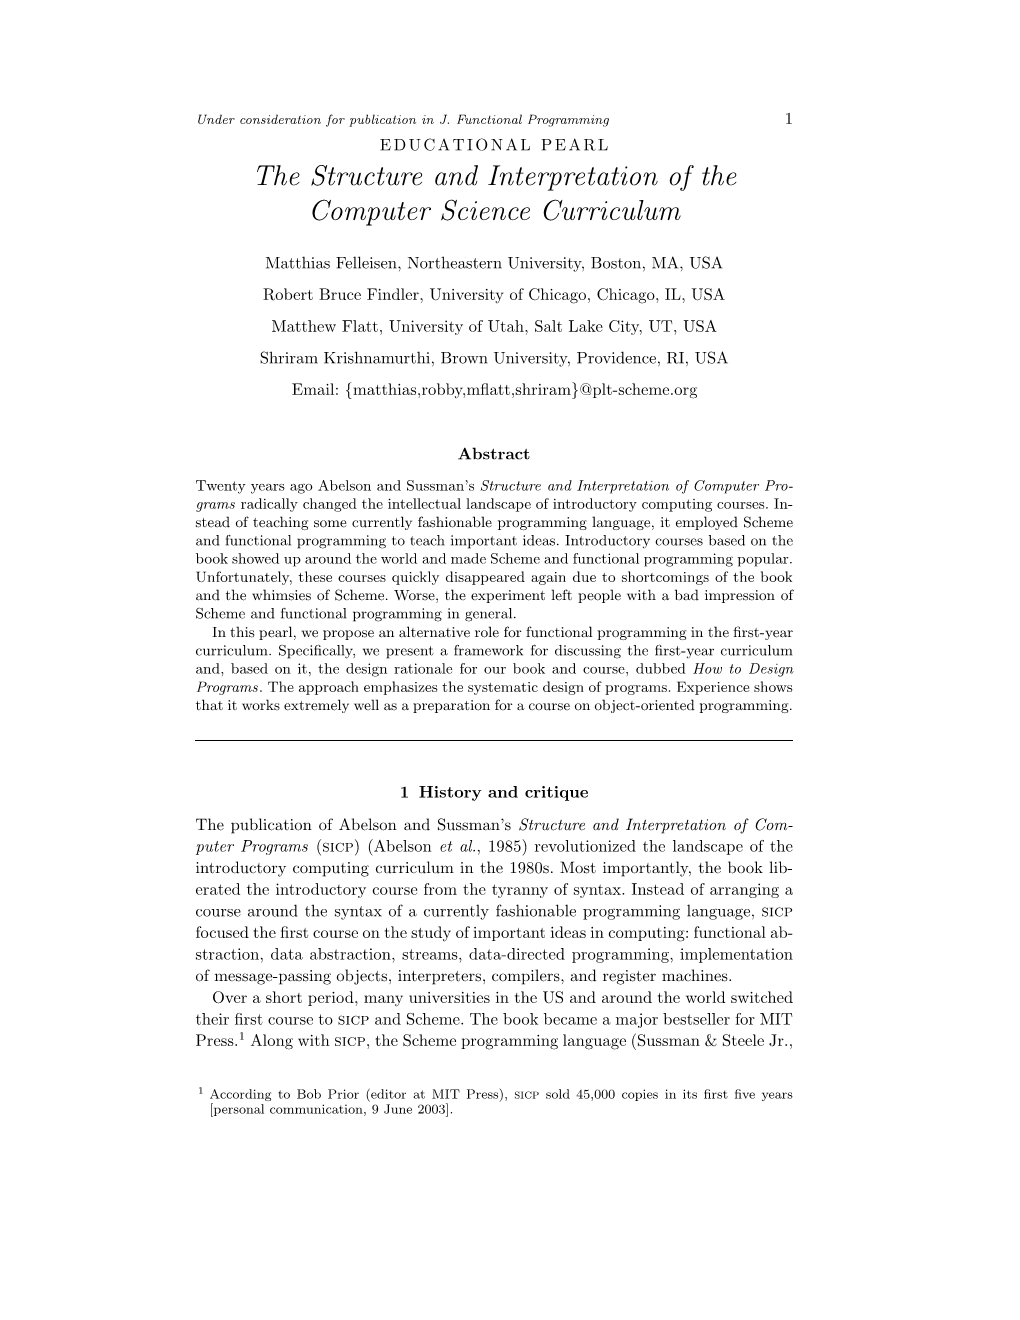 The Structure and Interpretation of the Computer Science Curriculum